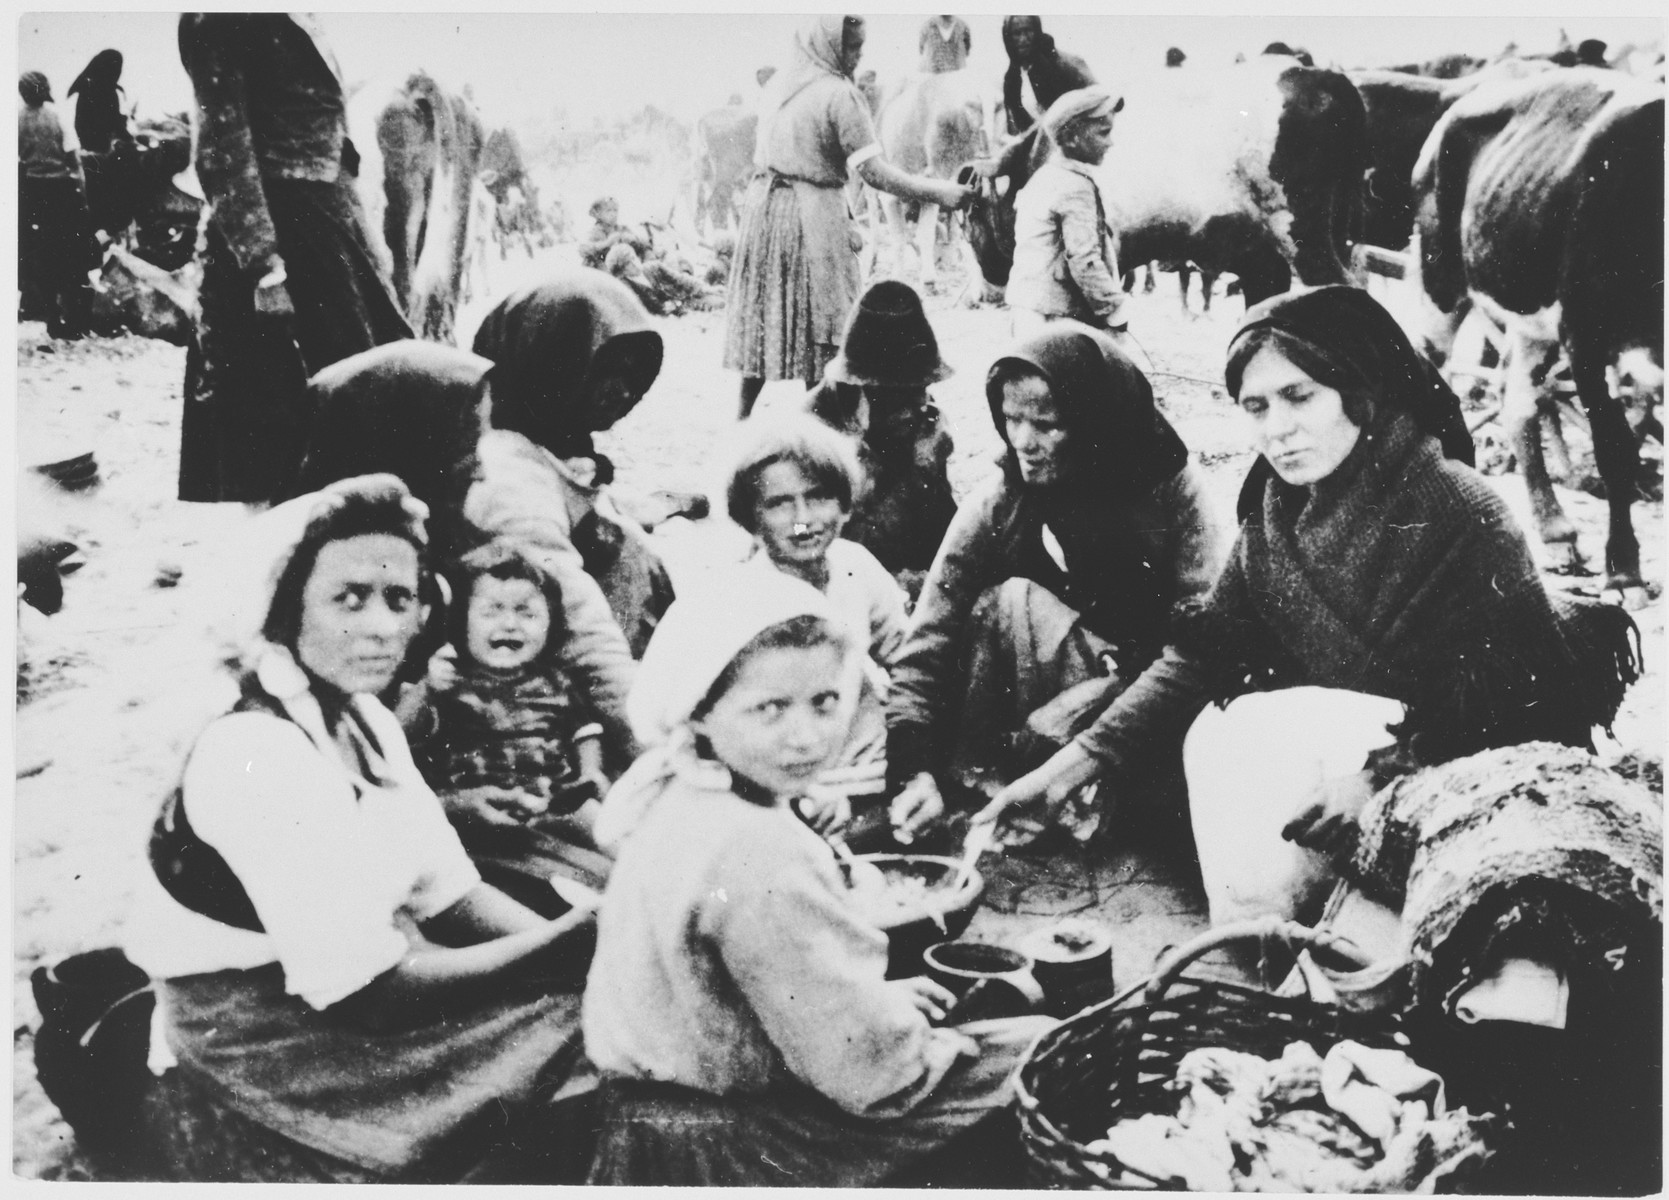 [Probably Serbian women and children from the Kozara region who have been rounded-up for deportation, eating a meal outside at a transit camp.]